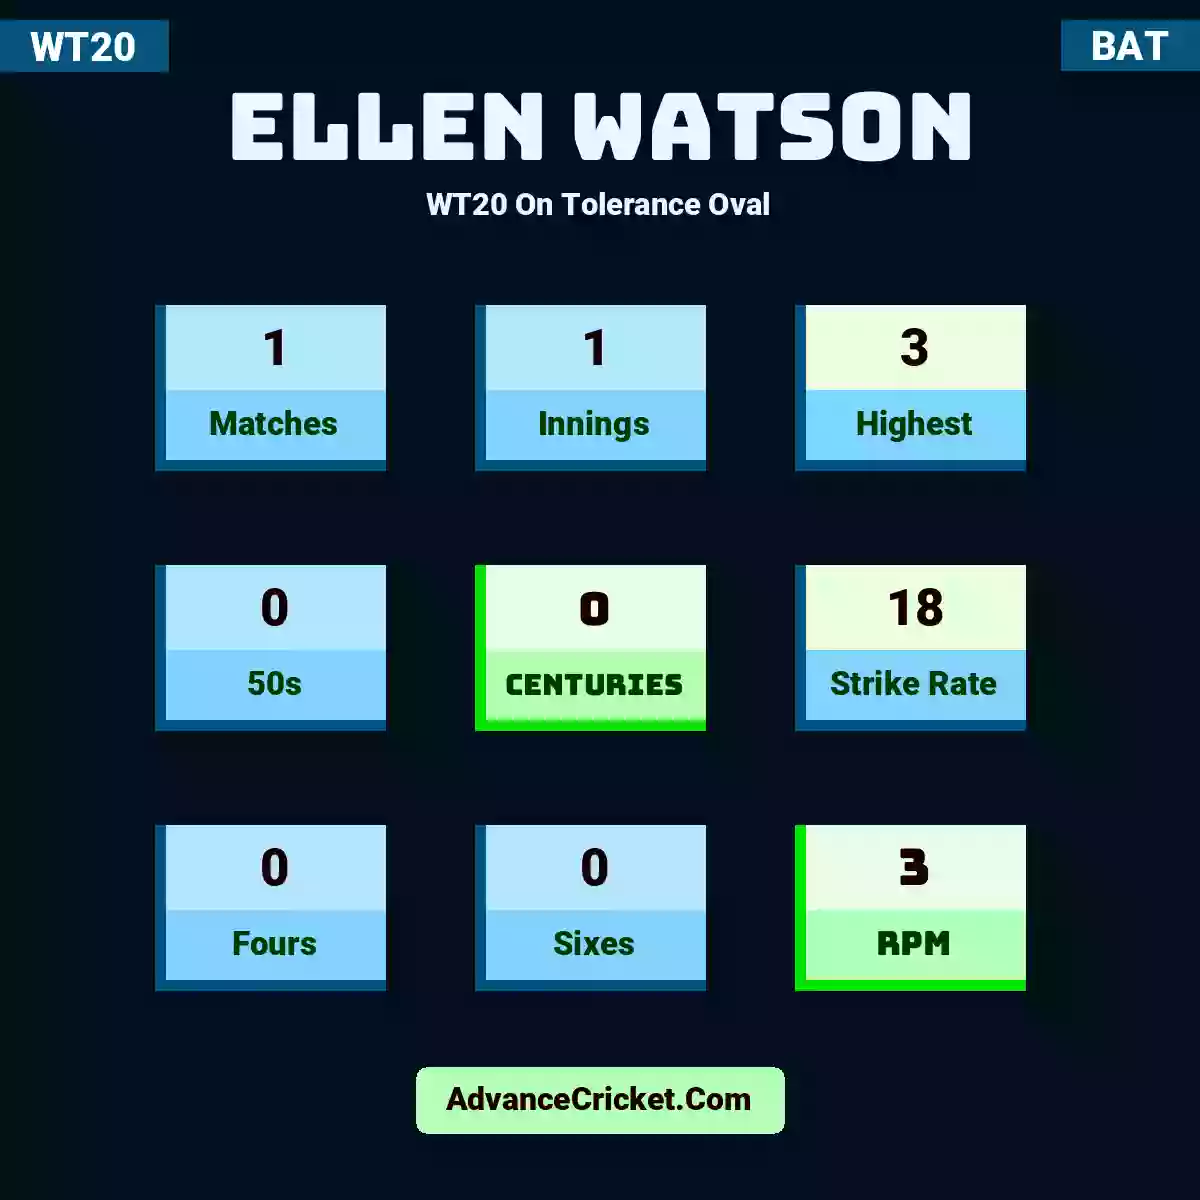 Ellen Watson WT20  On Tolerance Oval, Ellen Watson played 1 matches, scored 3 runs as highest, 0 half-centuries, and 0 centuries, with a strike rate of 18. E.Watson hit 0 fours and 0 sixes, with an RPM of 3.